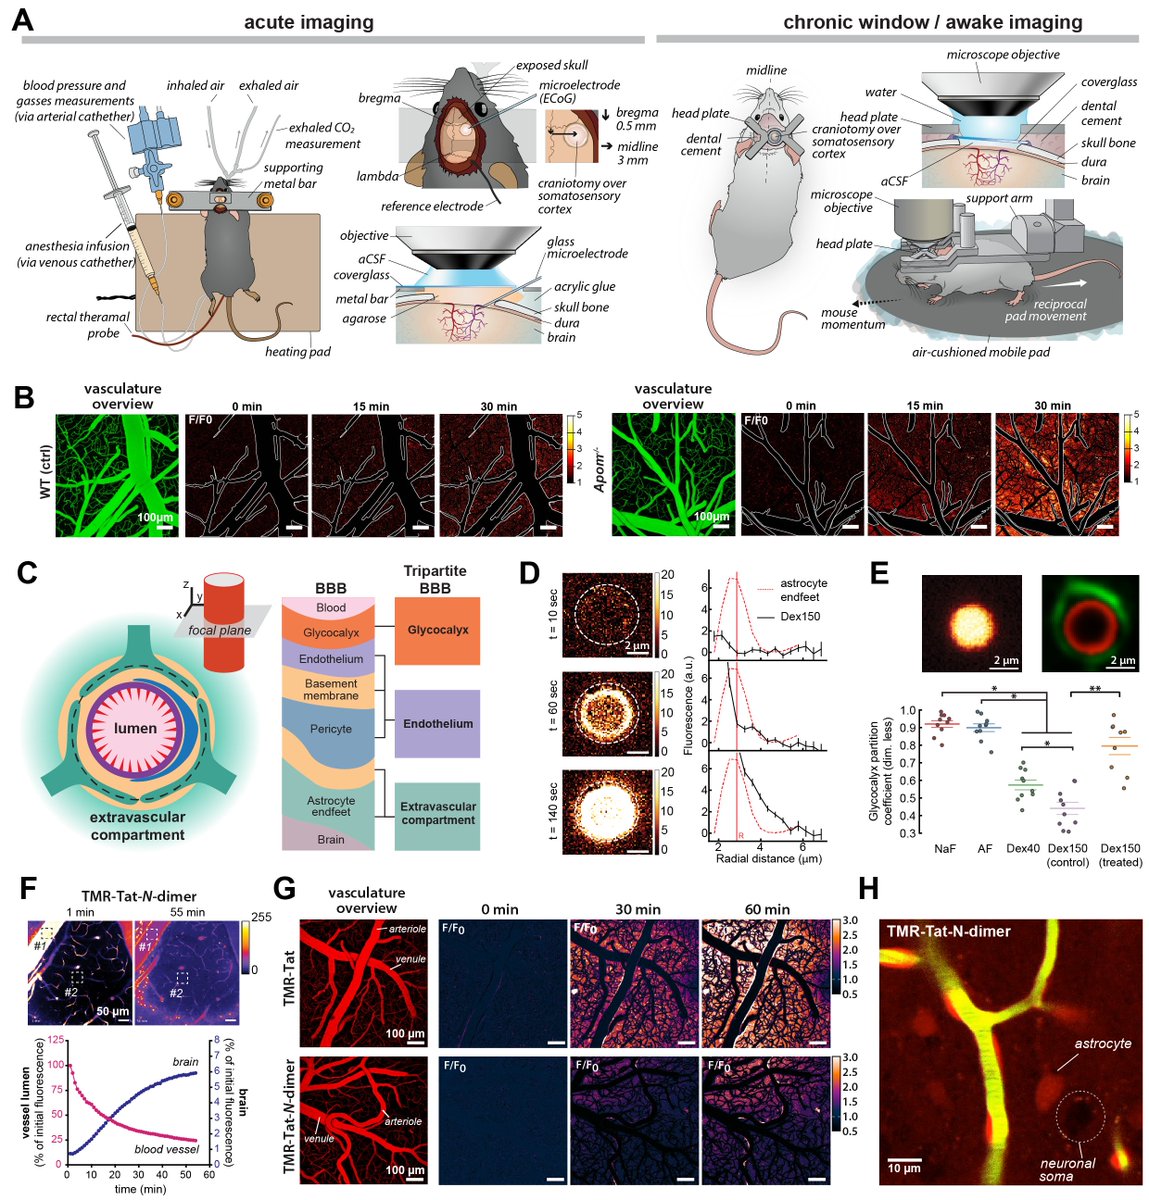 How to use #twophoton #microscopy to investigate #bloodbrainbarrier transport and #CNS #drugdelivery? Check the summary of our work @transneuro_lab, where we pit  #fluorescence #imaging #invivo against classical approaches to study the #brain and #BBB tinyurl.com/2p9bwbj9